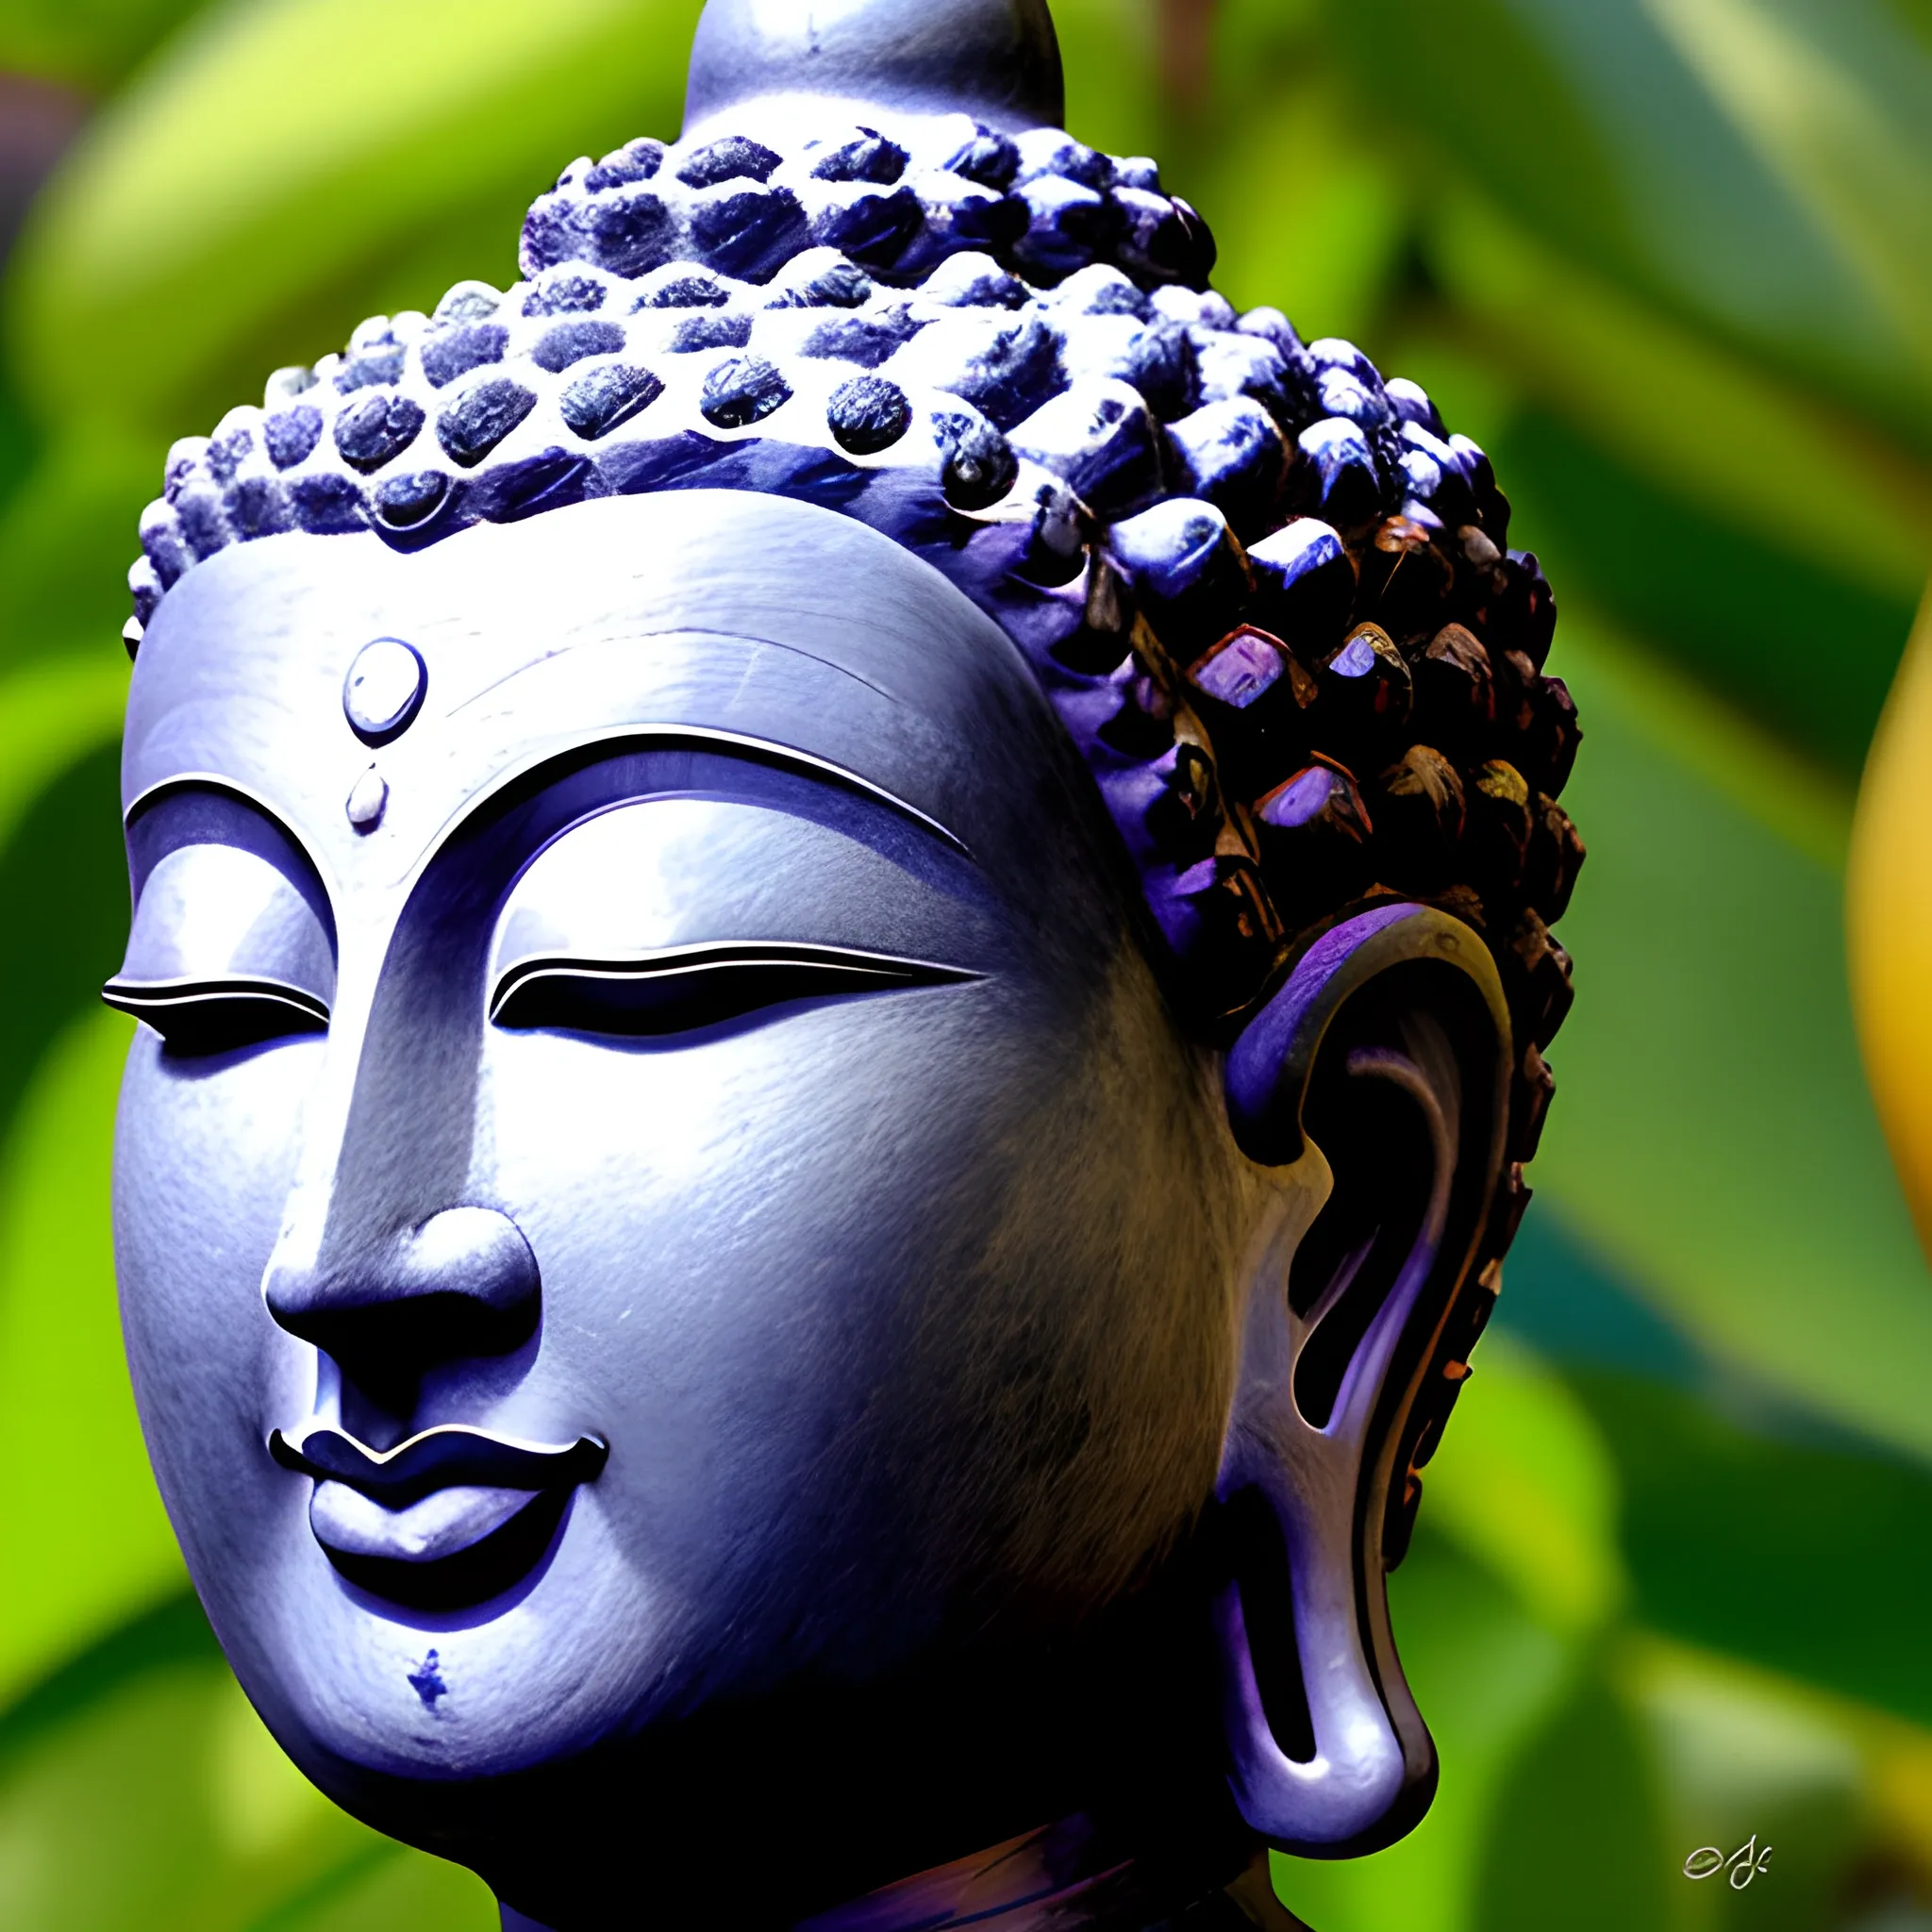 Buddha, the nose is broad and flat, the root of the nose is low or medium, the nasal protrusion is small, the diameter of the nostrils is large, the lips are protruding, the mouth is wide, and the lips are thick